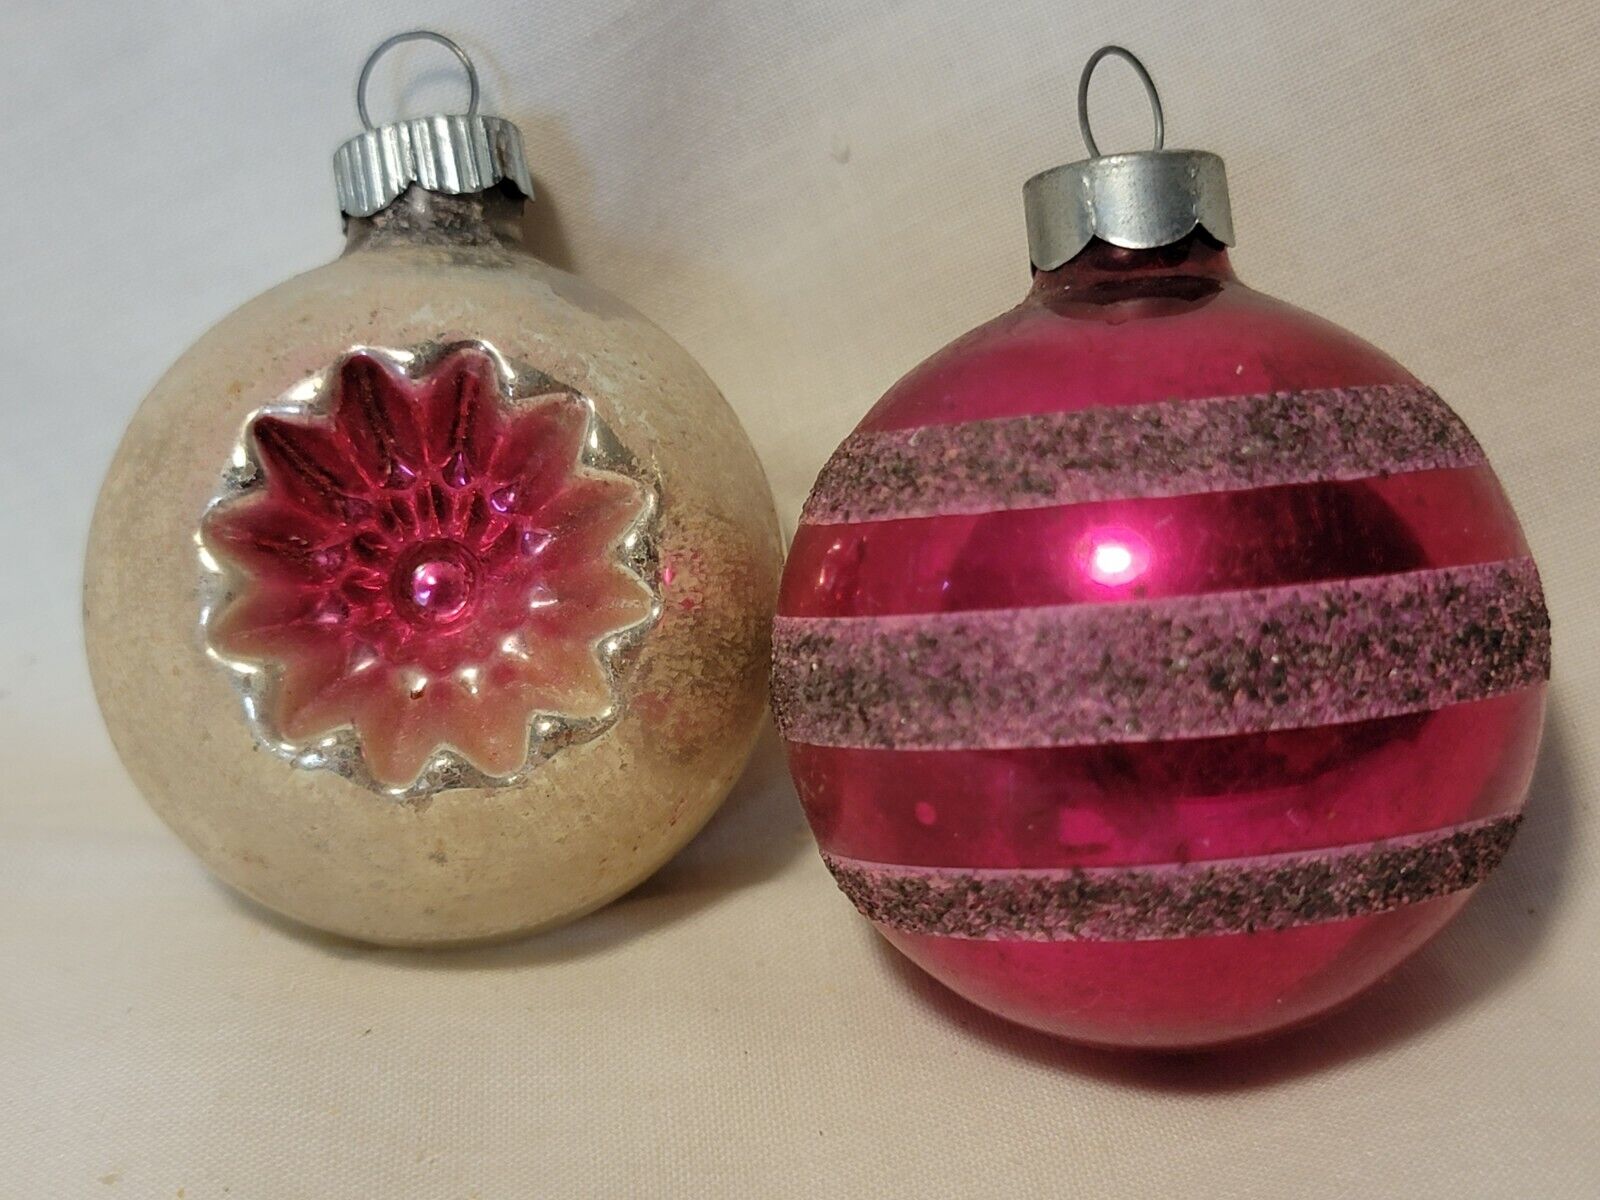 2 Vintage WWII Glass Ornaments Double Indent Striped Glitter Burgundy Dark Red